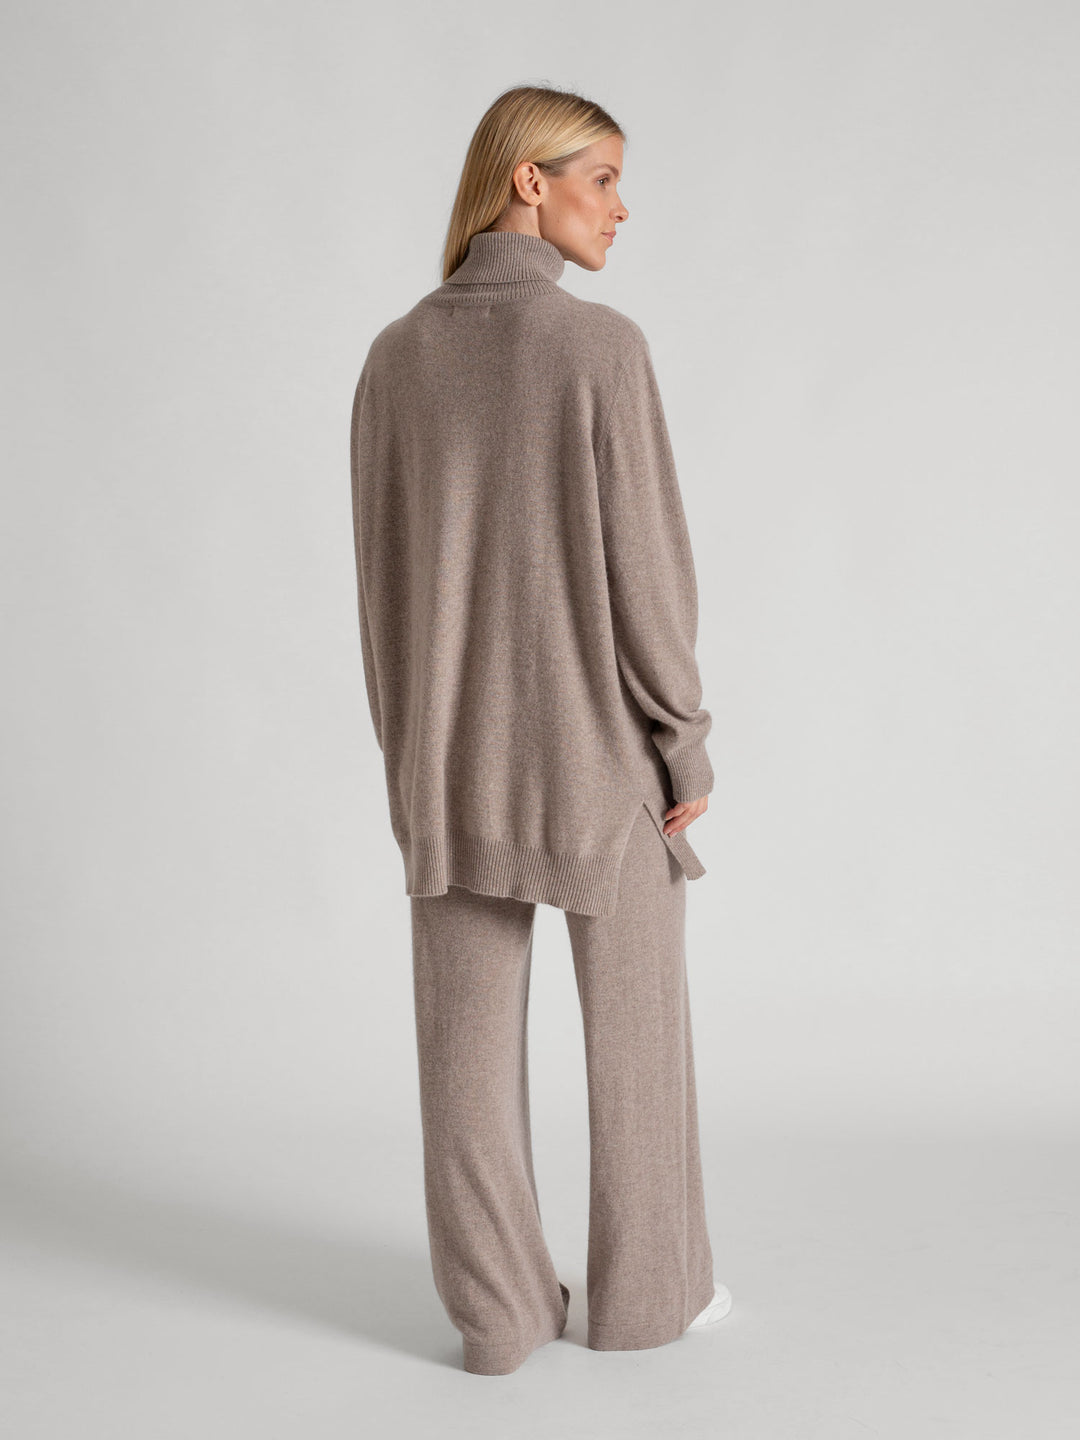 Long polo sweater in 100% pure cashmere. Scandinavian design by Kashmina. Color: Toast.